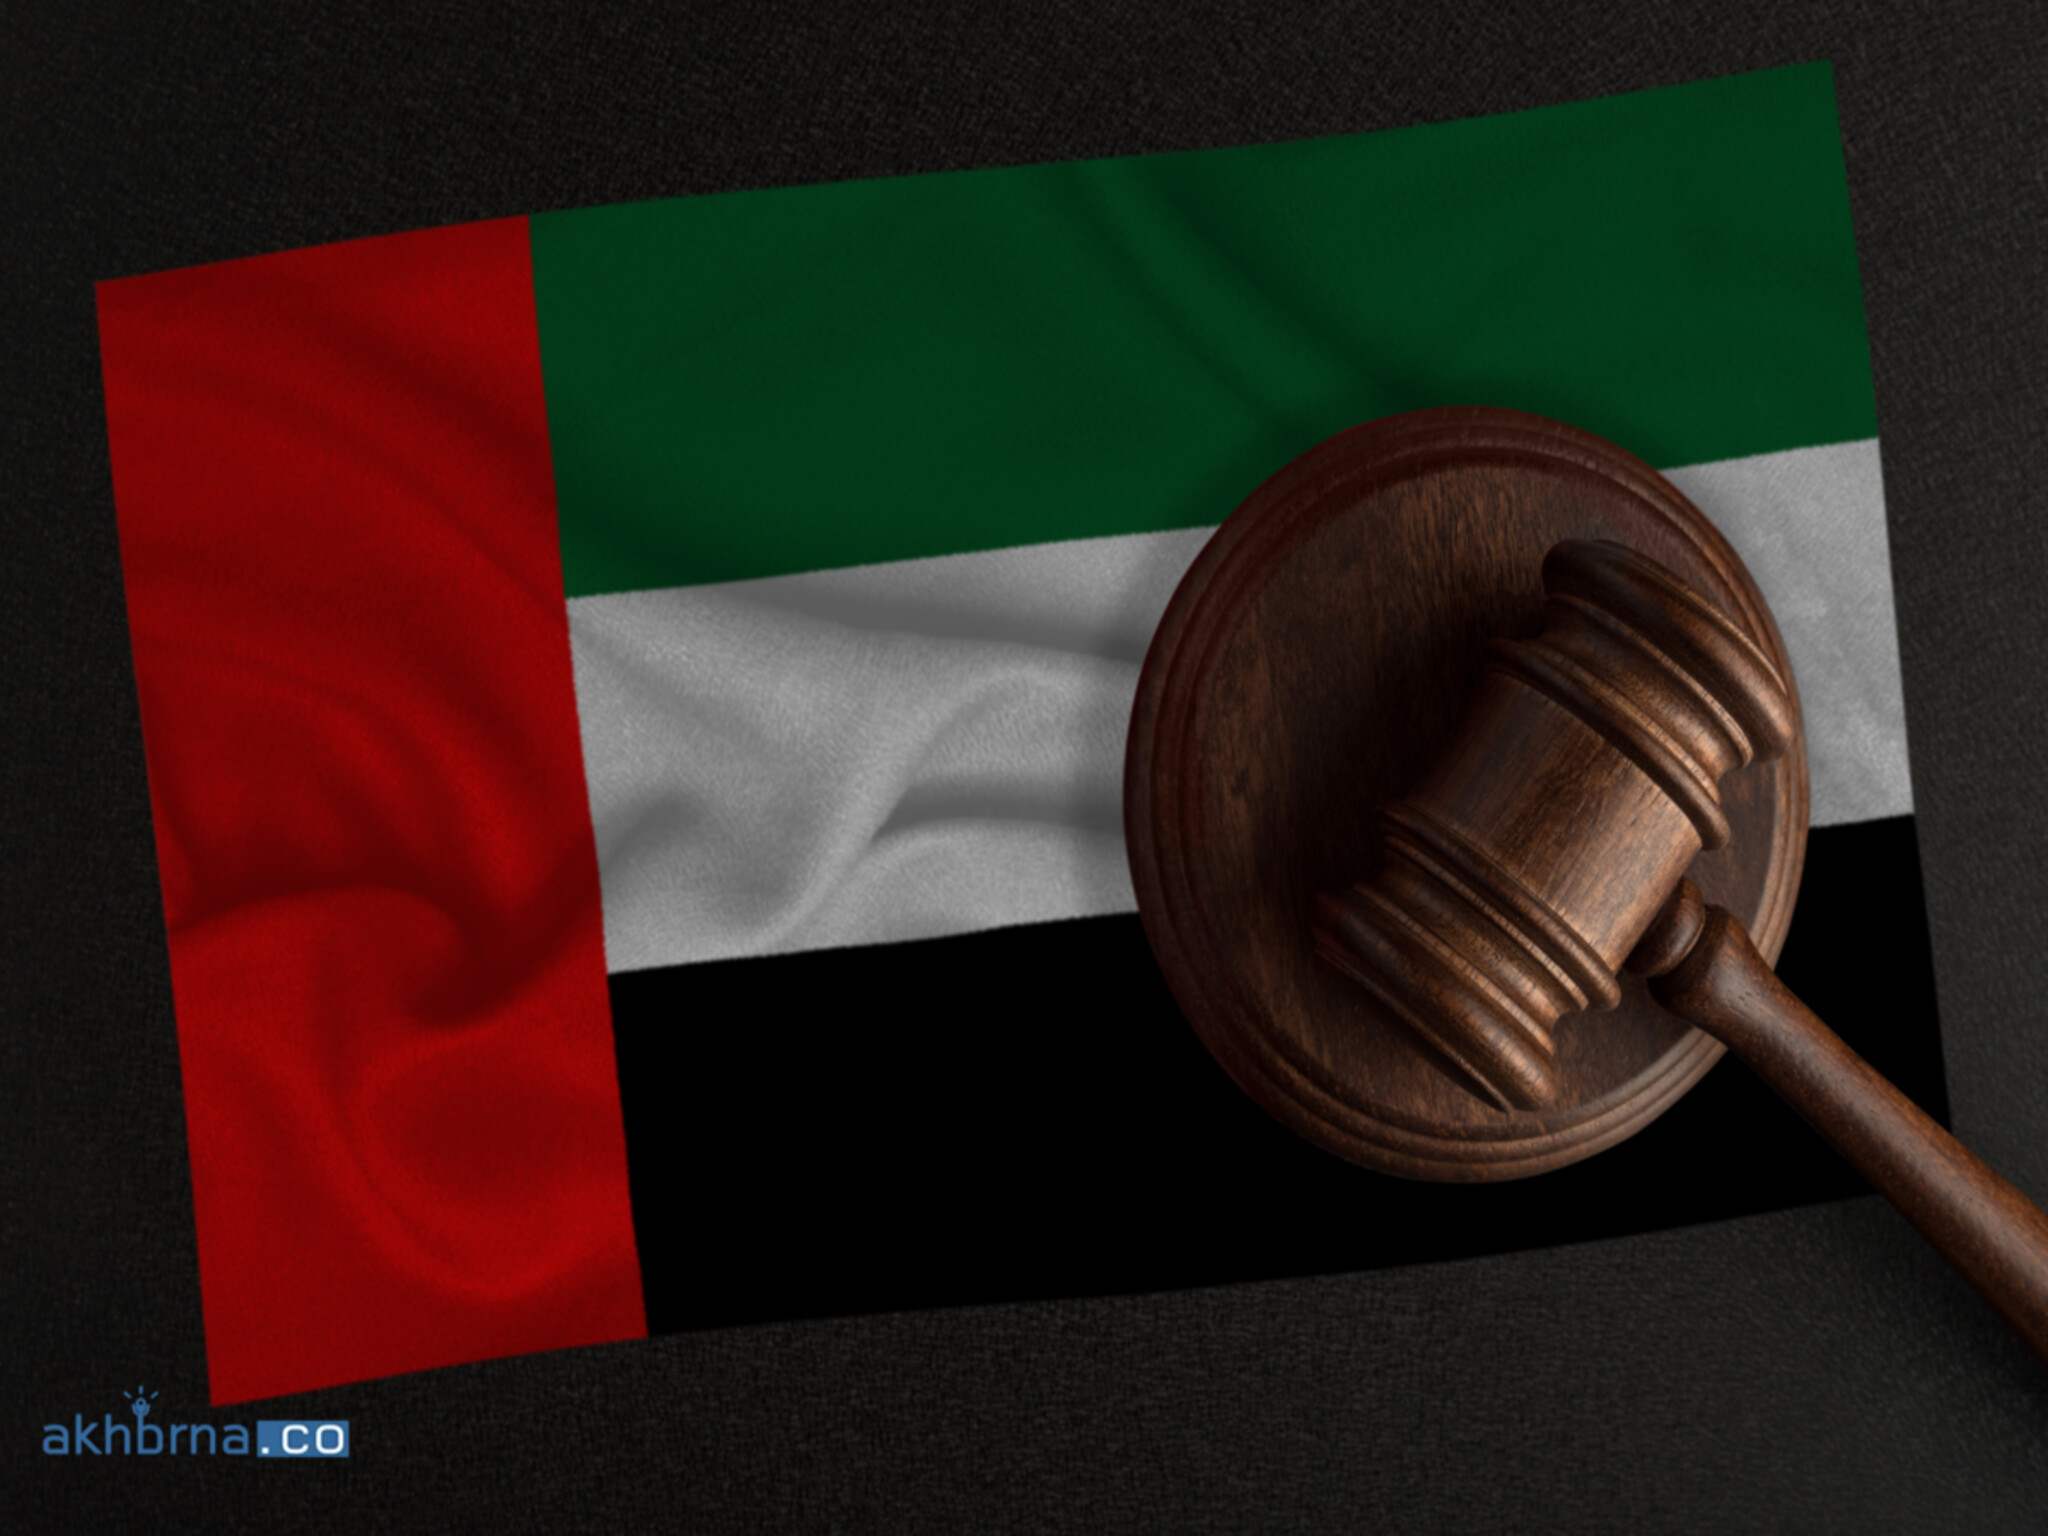 UAE court fines a mother 20,000 AED for aiding her son in beating his friend